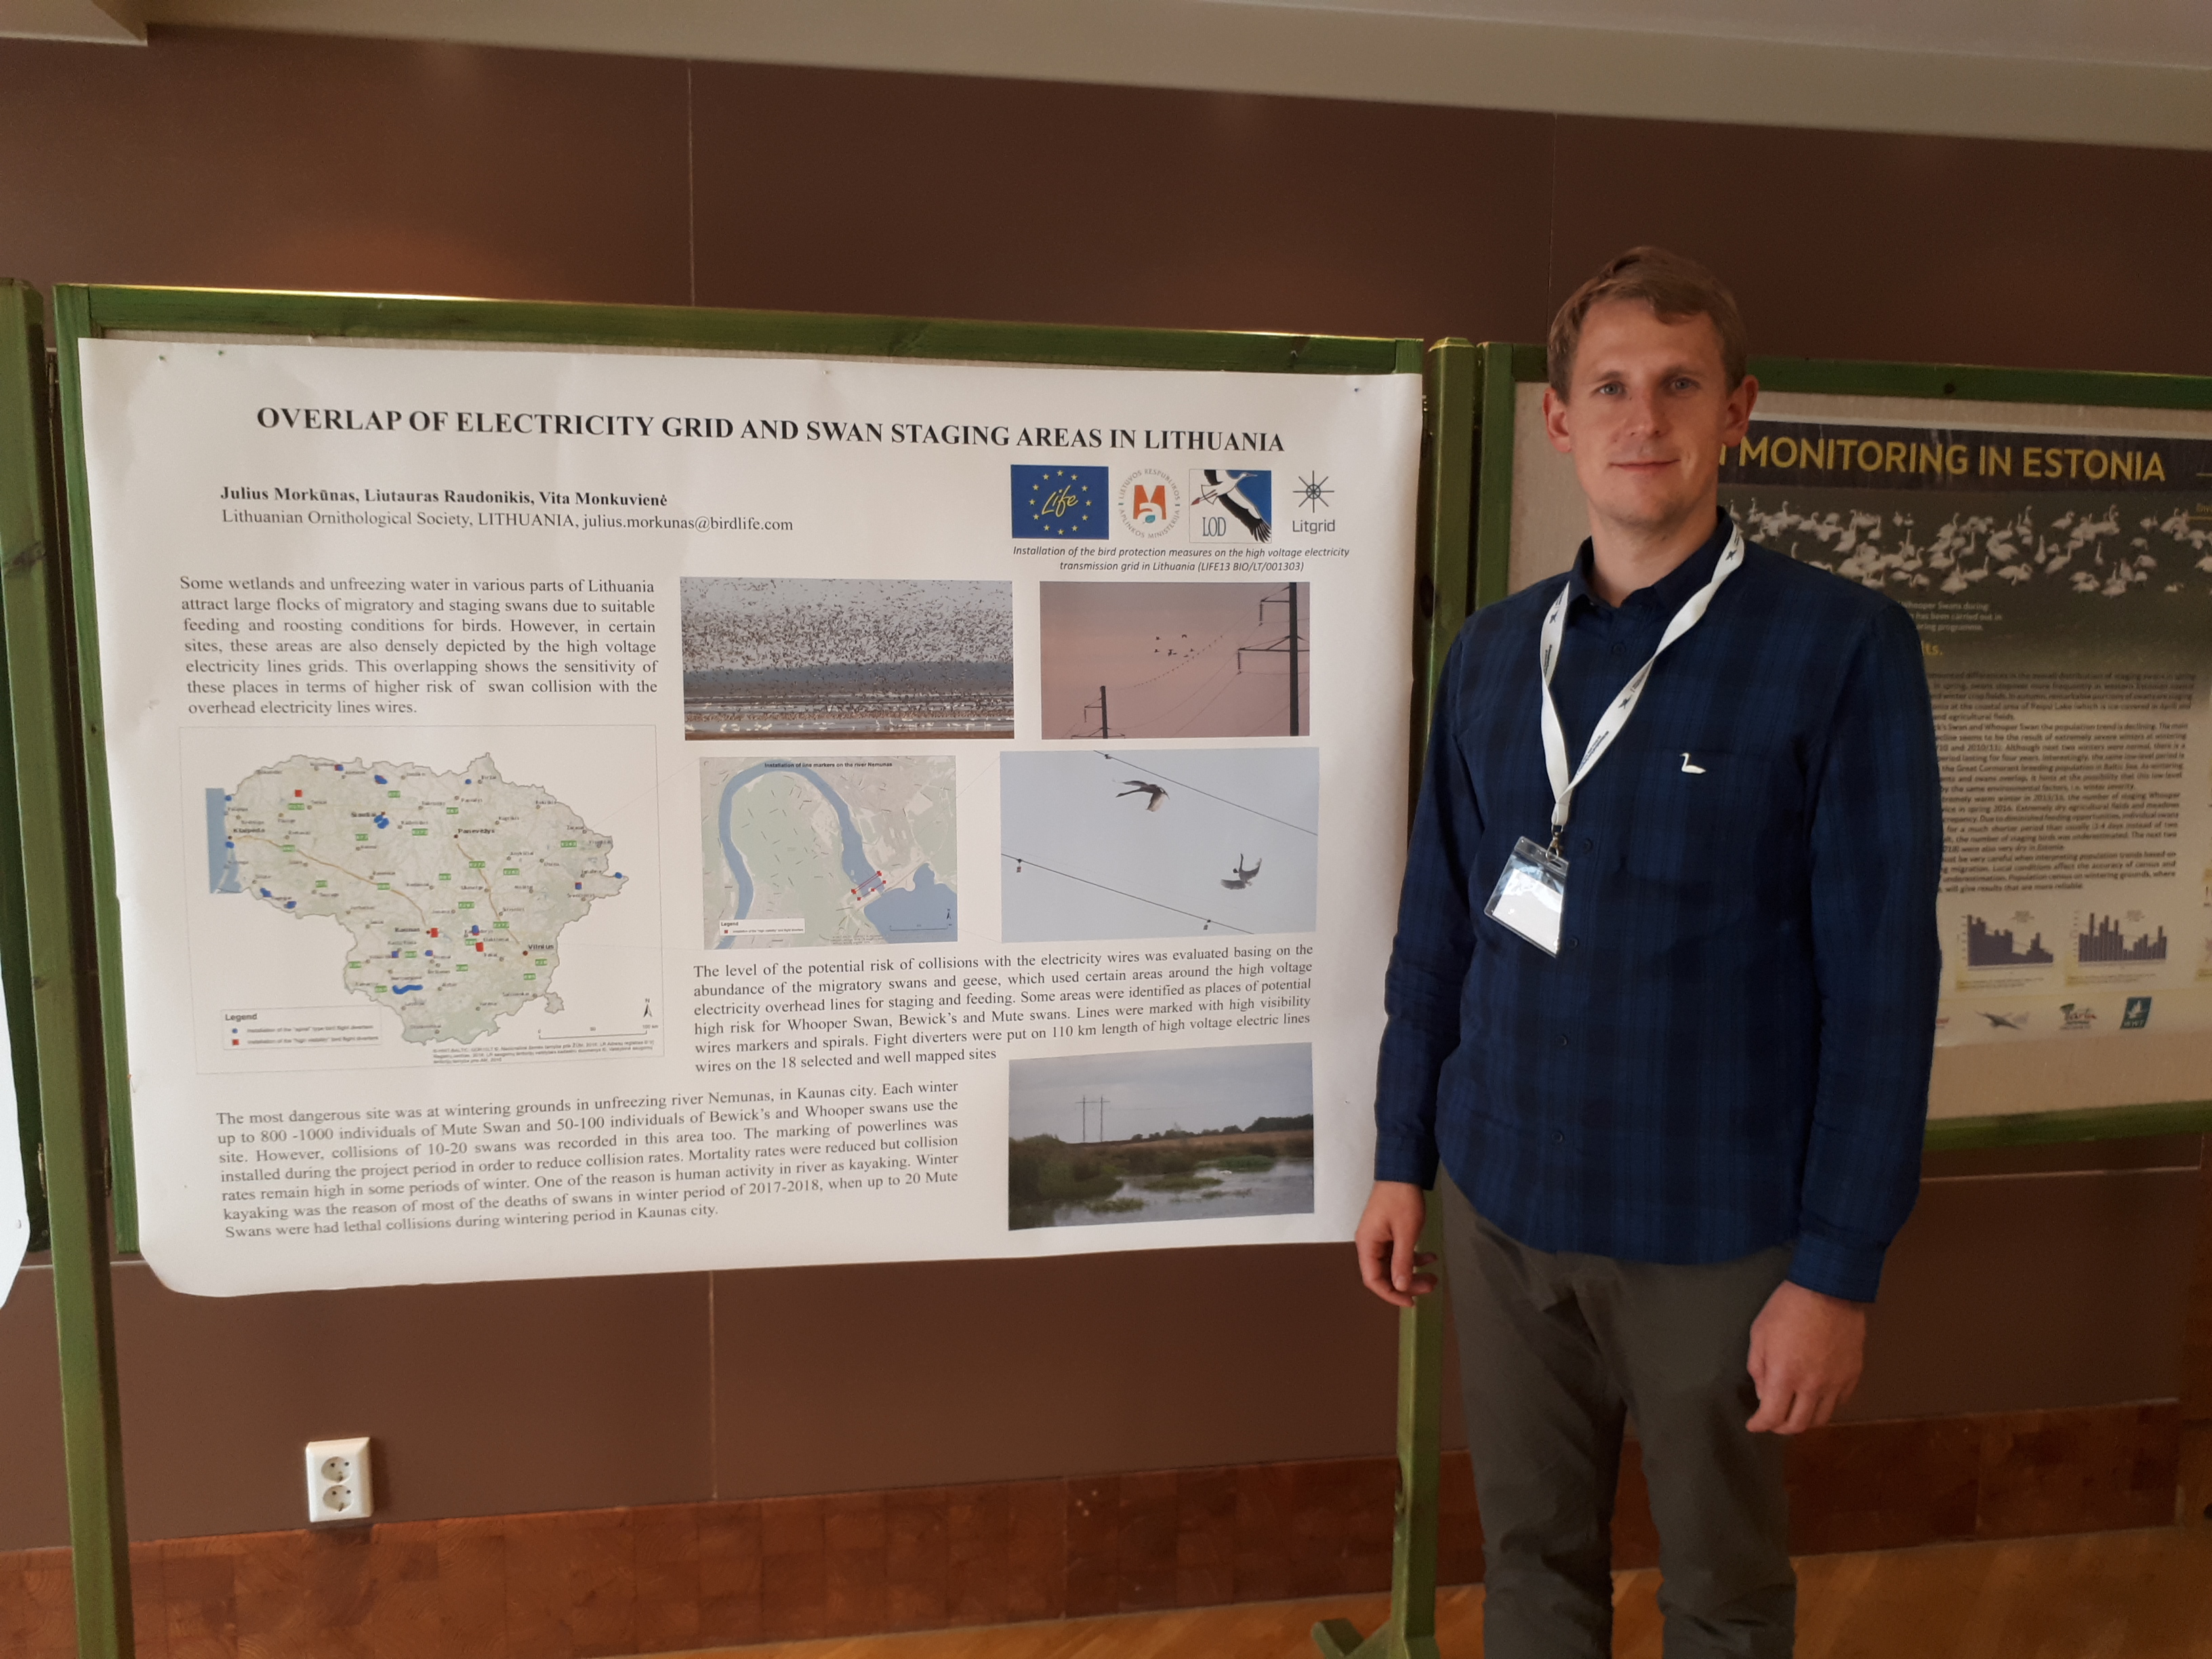 Project results were presented at International Swan Symposium in Estonia 